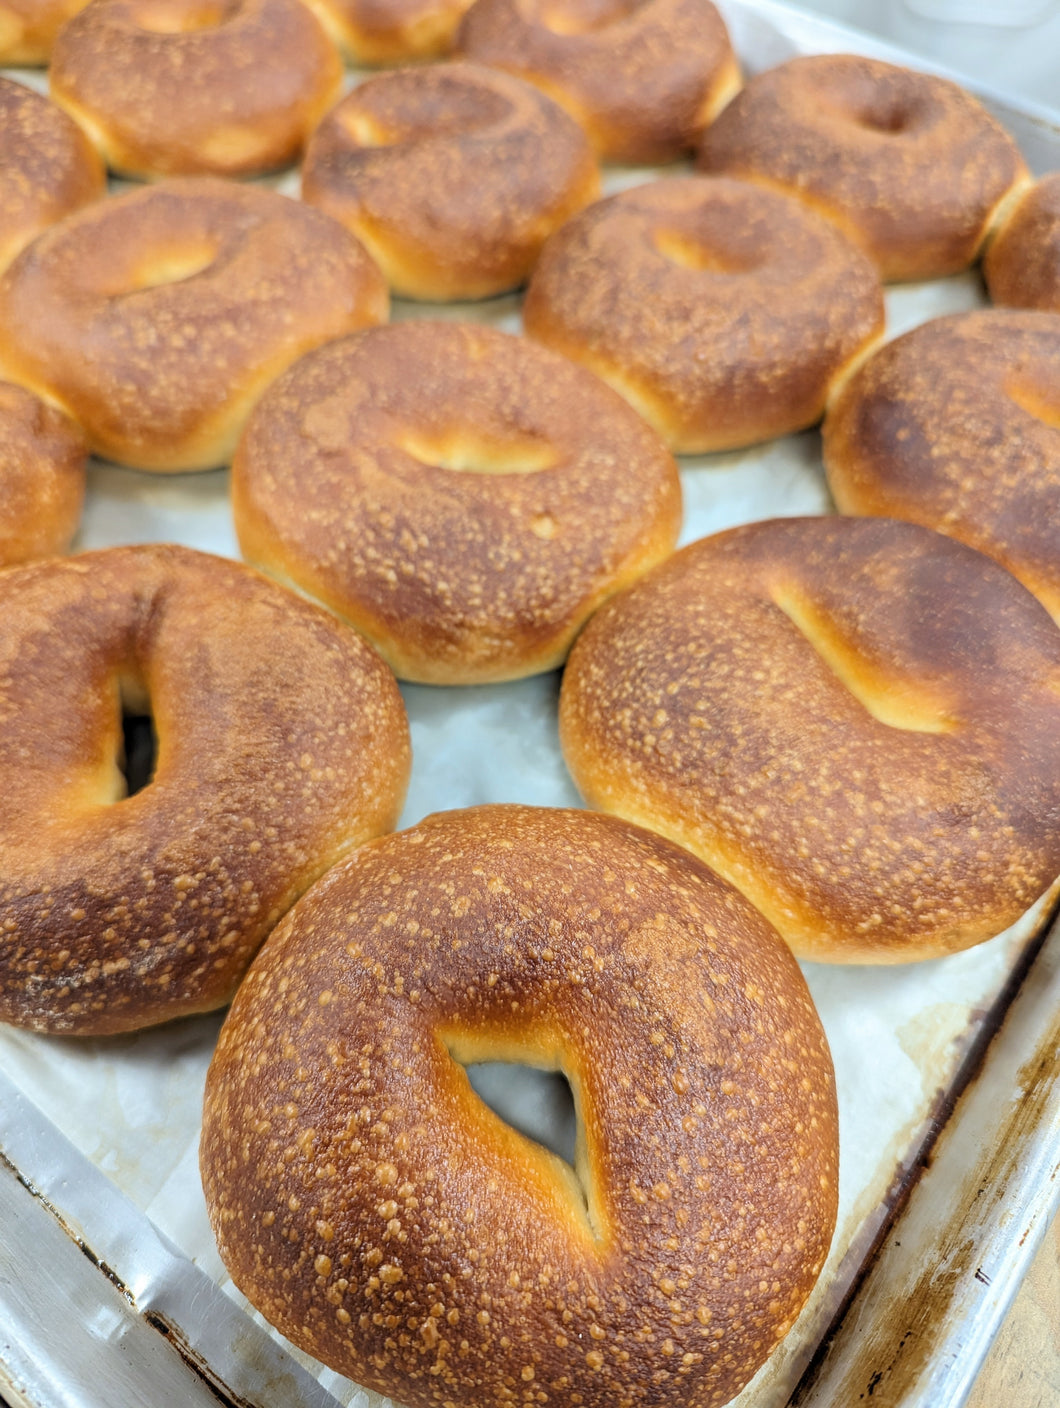 Hand Rolled Bagel 6-Packs (Available on Monday Deliveries Only) (vegan)